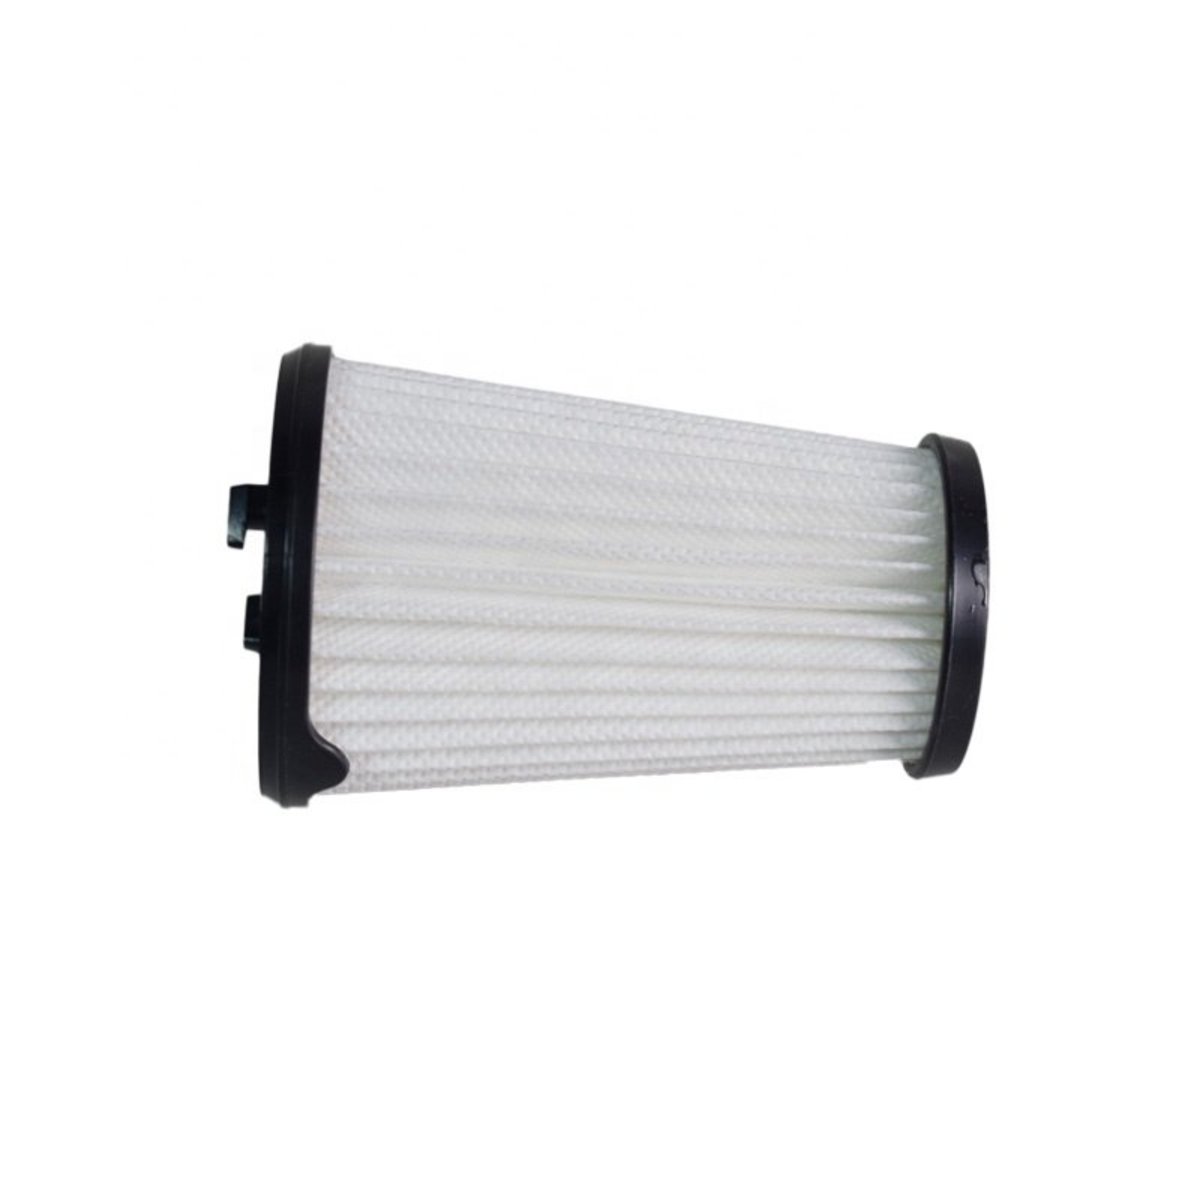 Details about   2x Vacuum Cleaner Filters Kit For Electrolux ZB3301 ZB3311 Floor Sweeping 